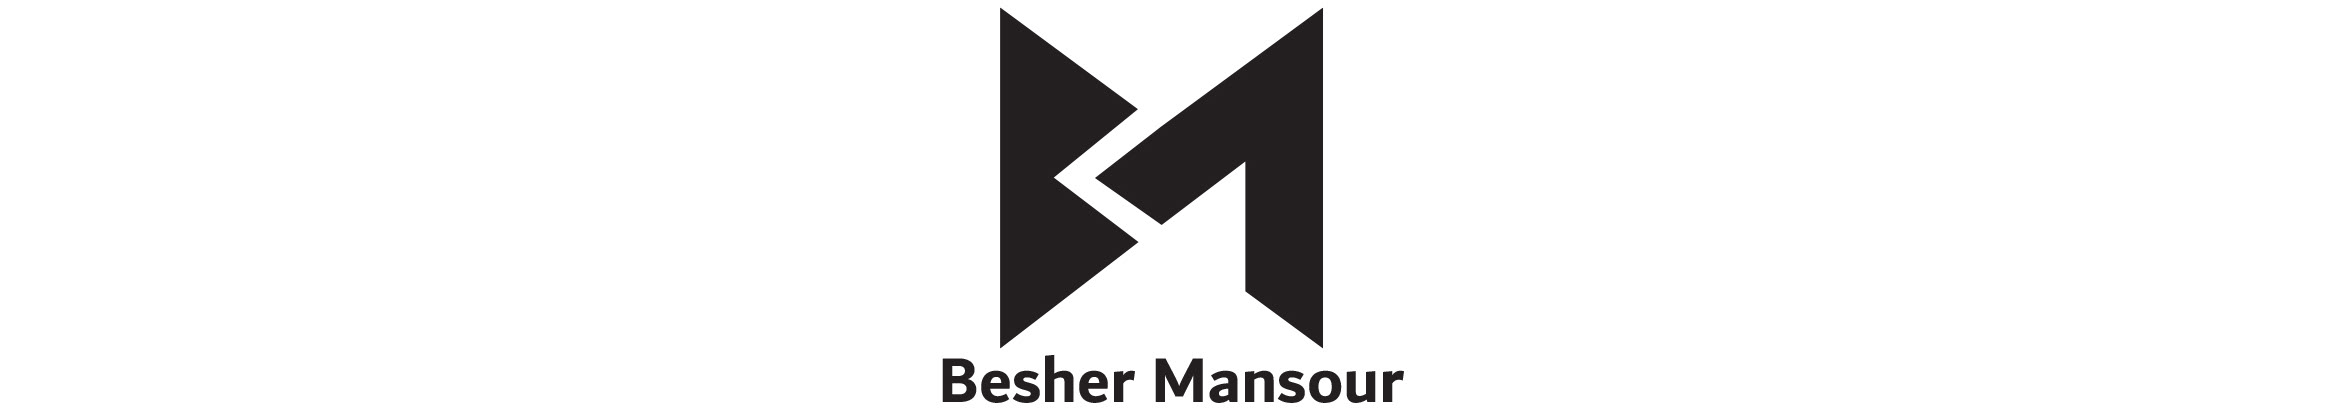 Mahmoud Besher Mansour's profile banner